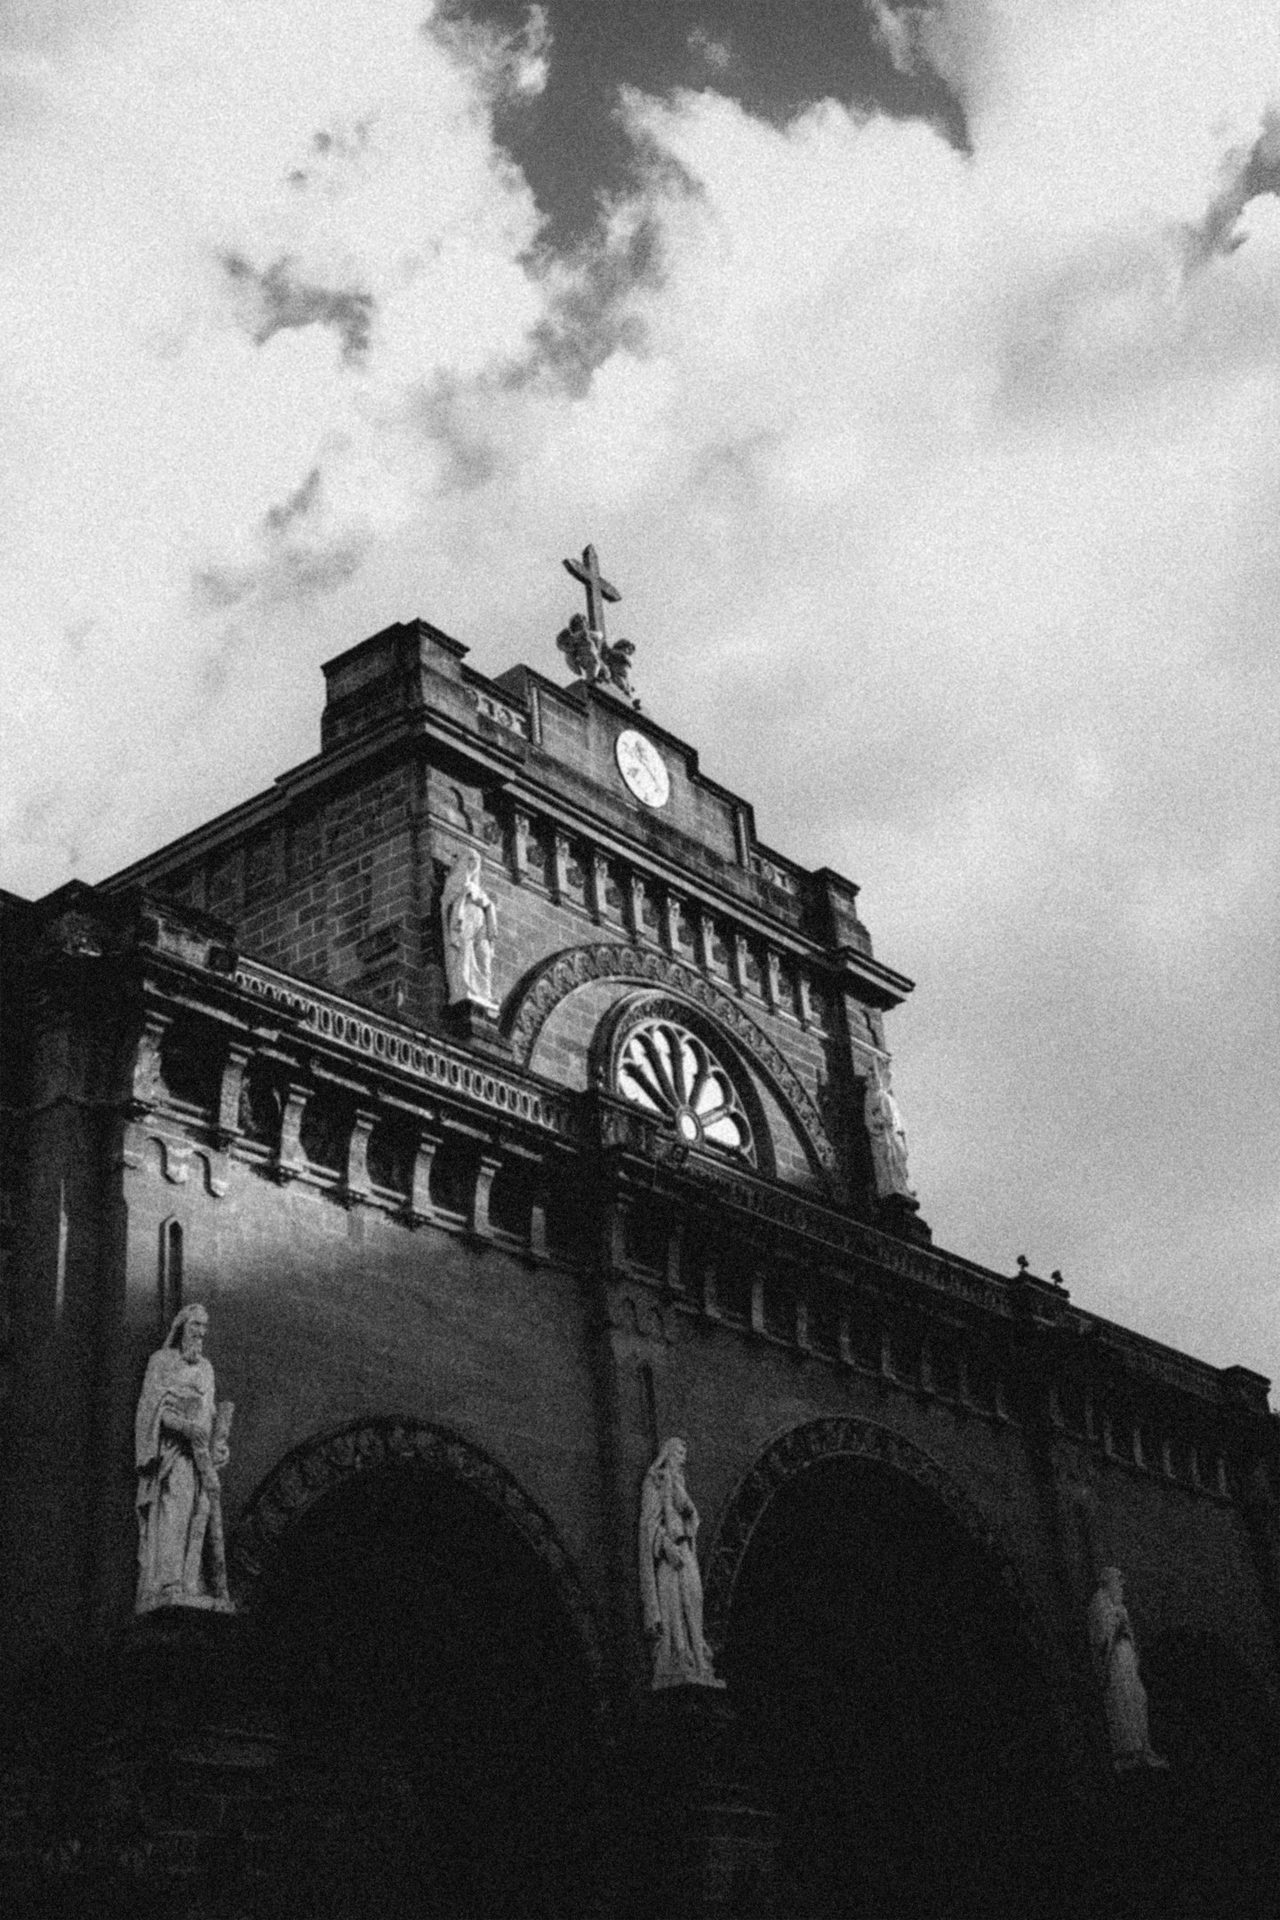 Cloud, Sky, Building, Tower, Clock, Black-and-white